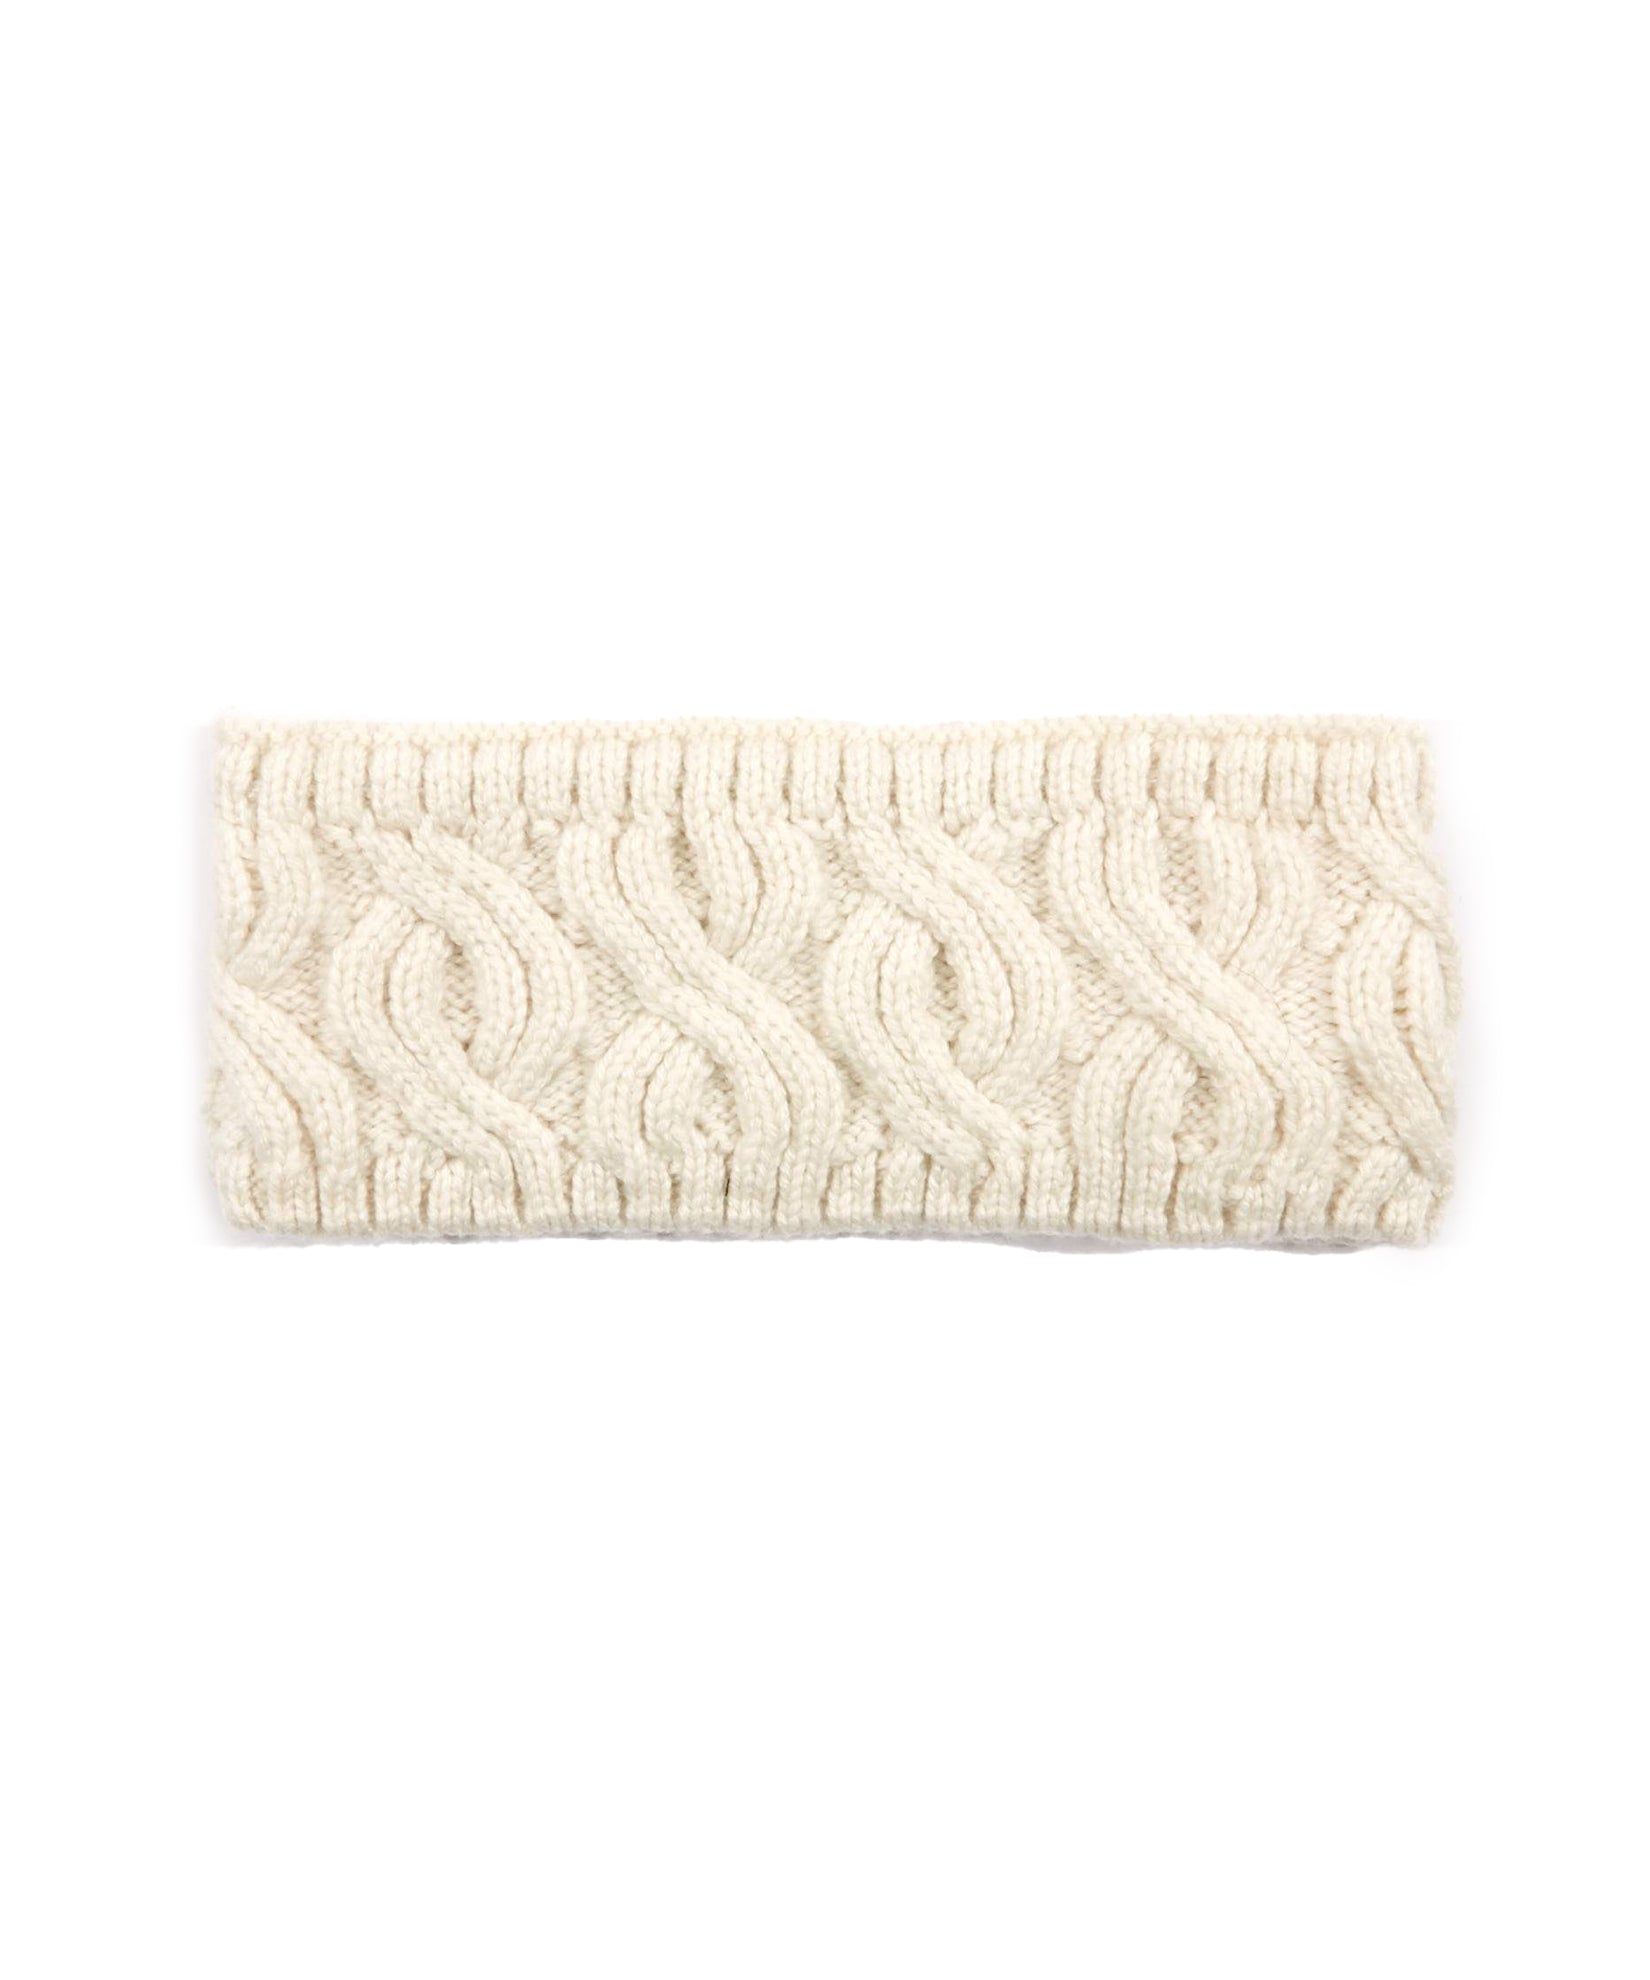 Recycled Headband in color Ivory